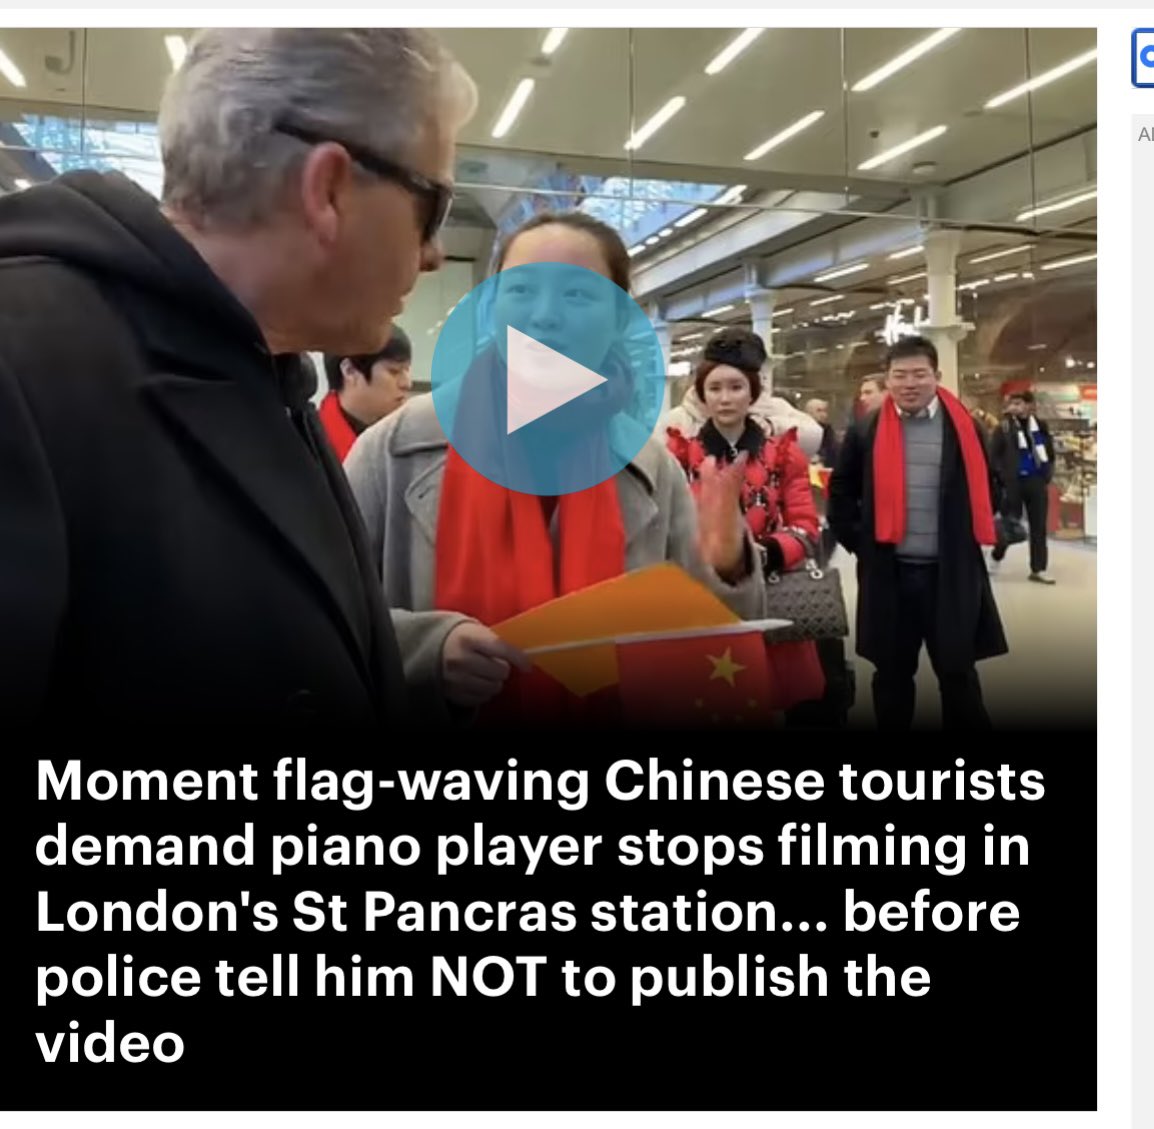 More on the incident where the Chinese communists screamed abuse at the piano player at St Pancras London, you can't make this stuff up  #stpancraspiano #chinesethugs 

youtu.be/Bm3o18j0MFY?si…